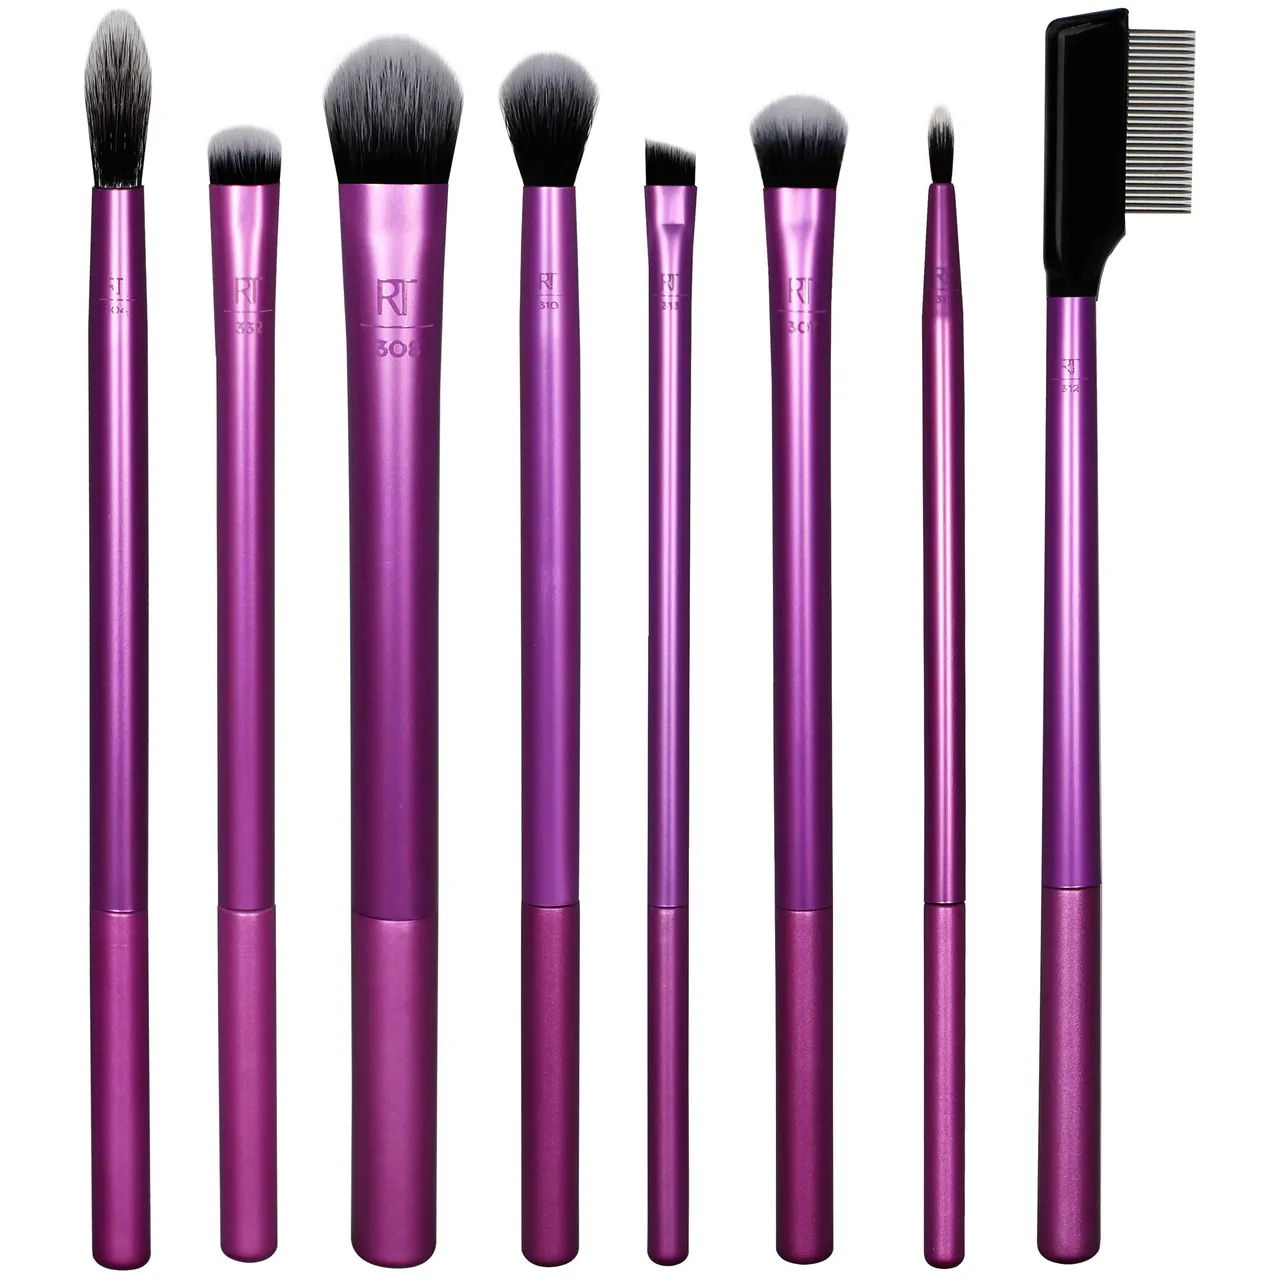 Real Techniques Everyday Eye Essentials Makeup Brush Set